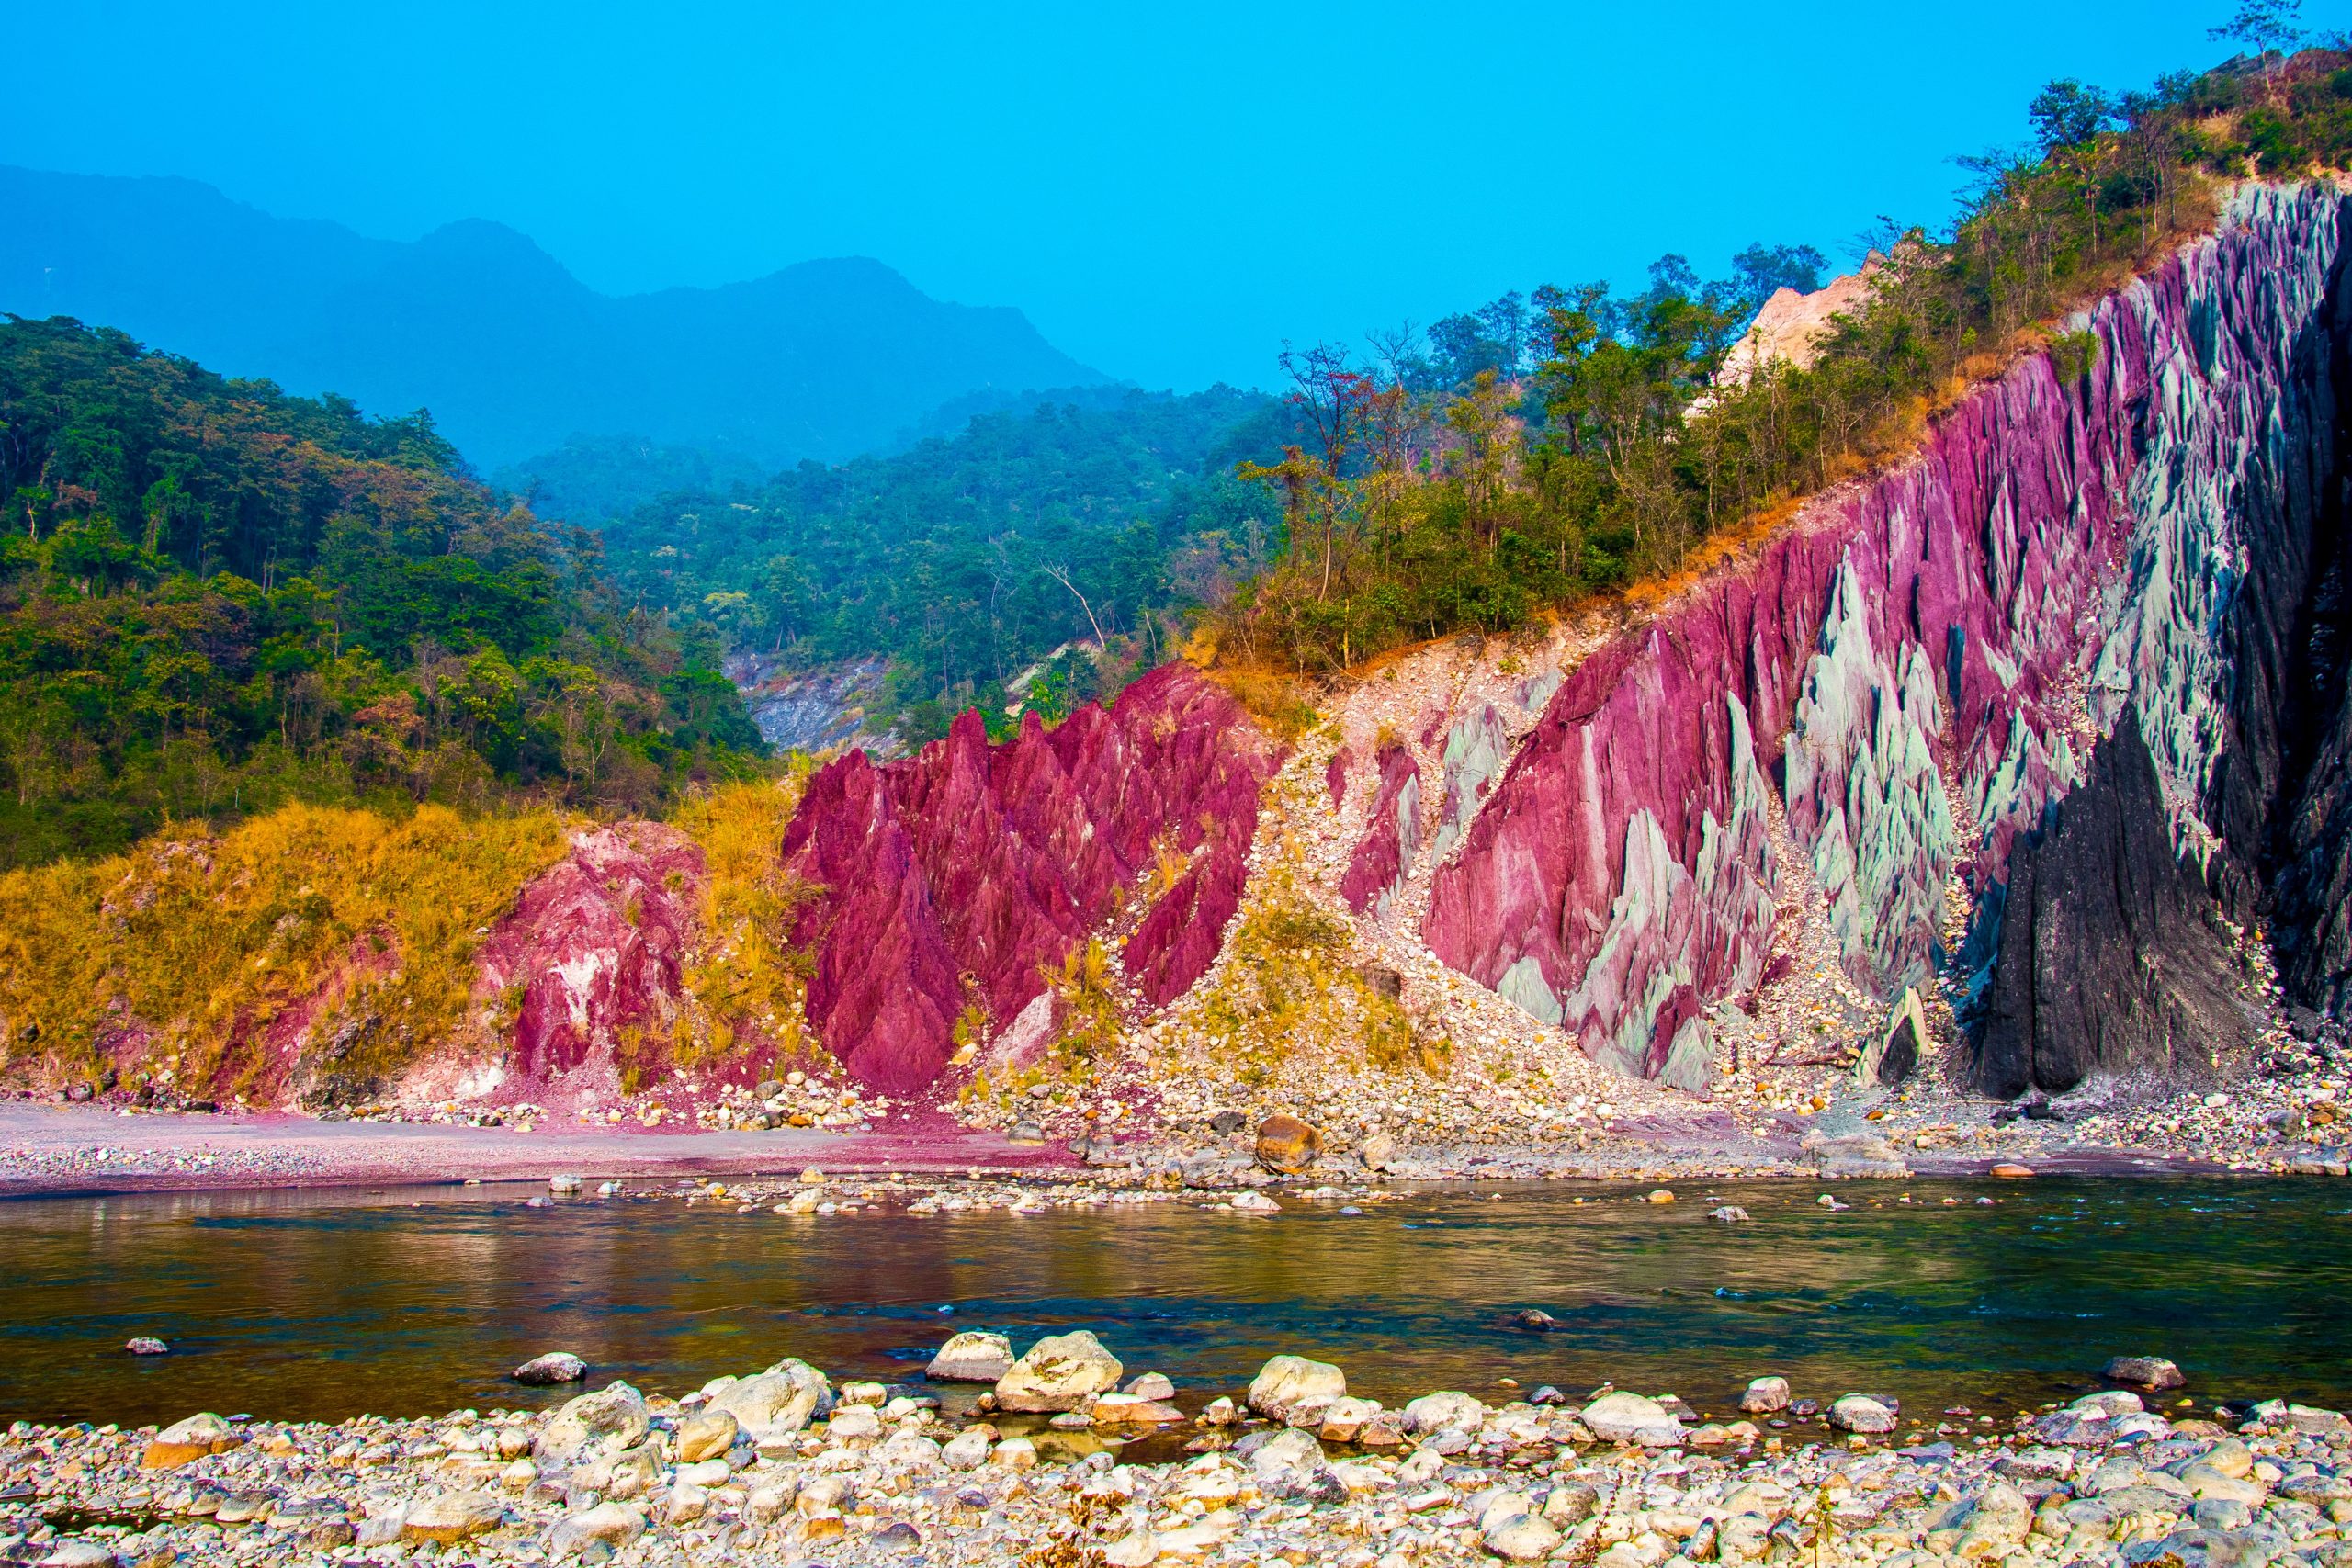 A river under colorful mountains